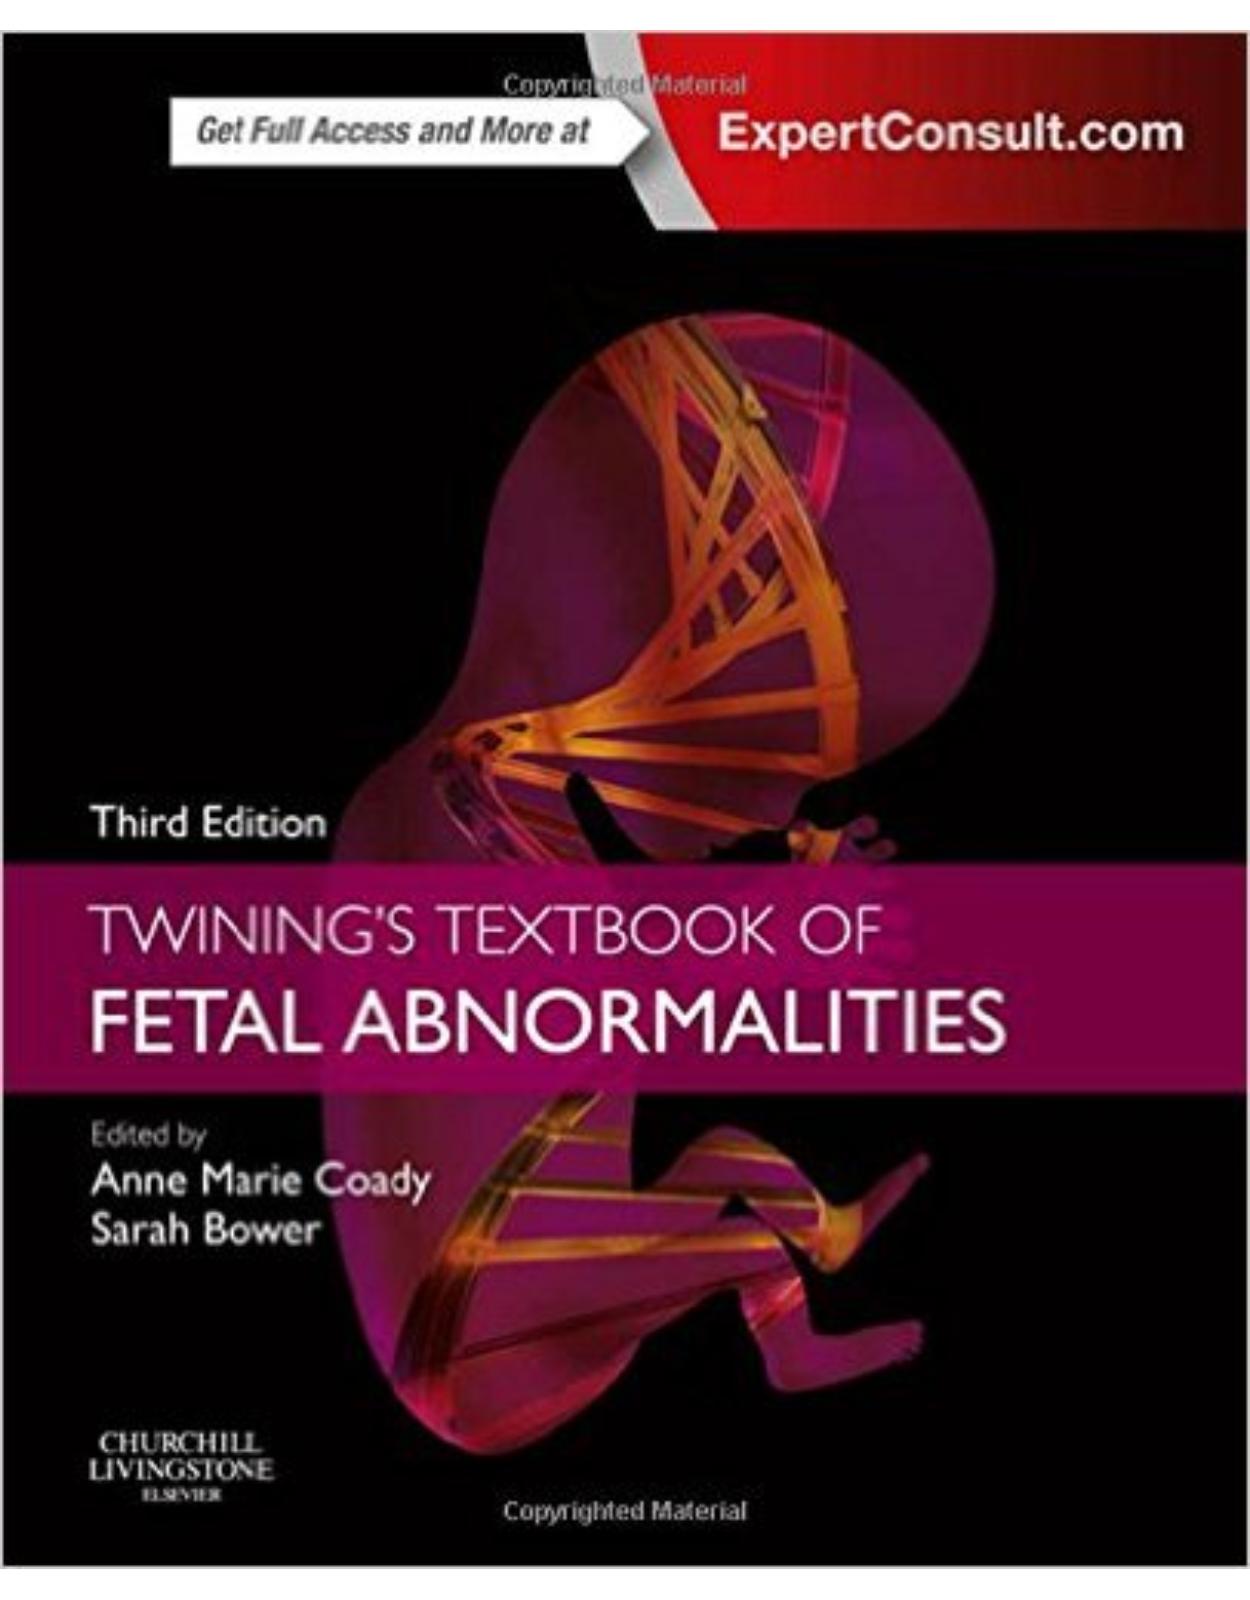 Twinings Textbook of Fetal Abnormalities, Expert Consult: Online and Print, 3rd Edition